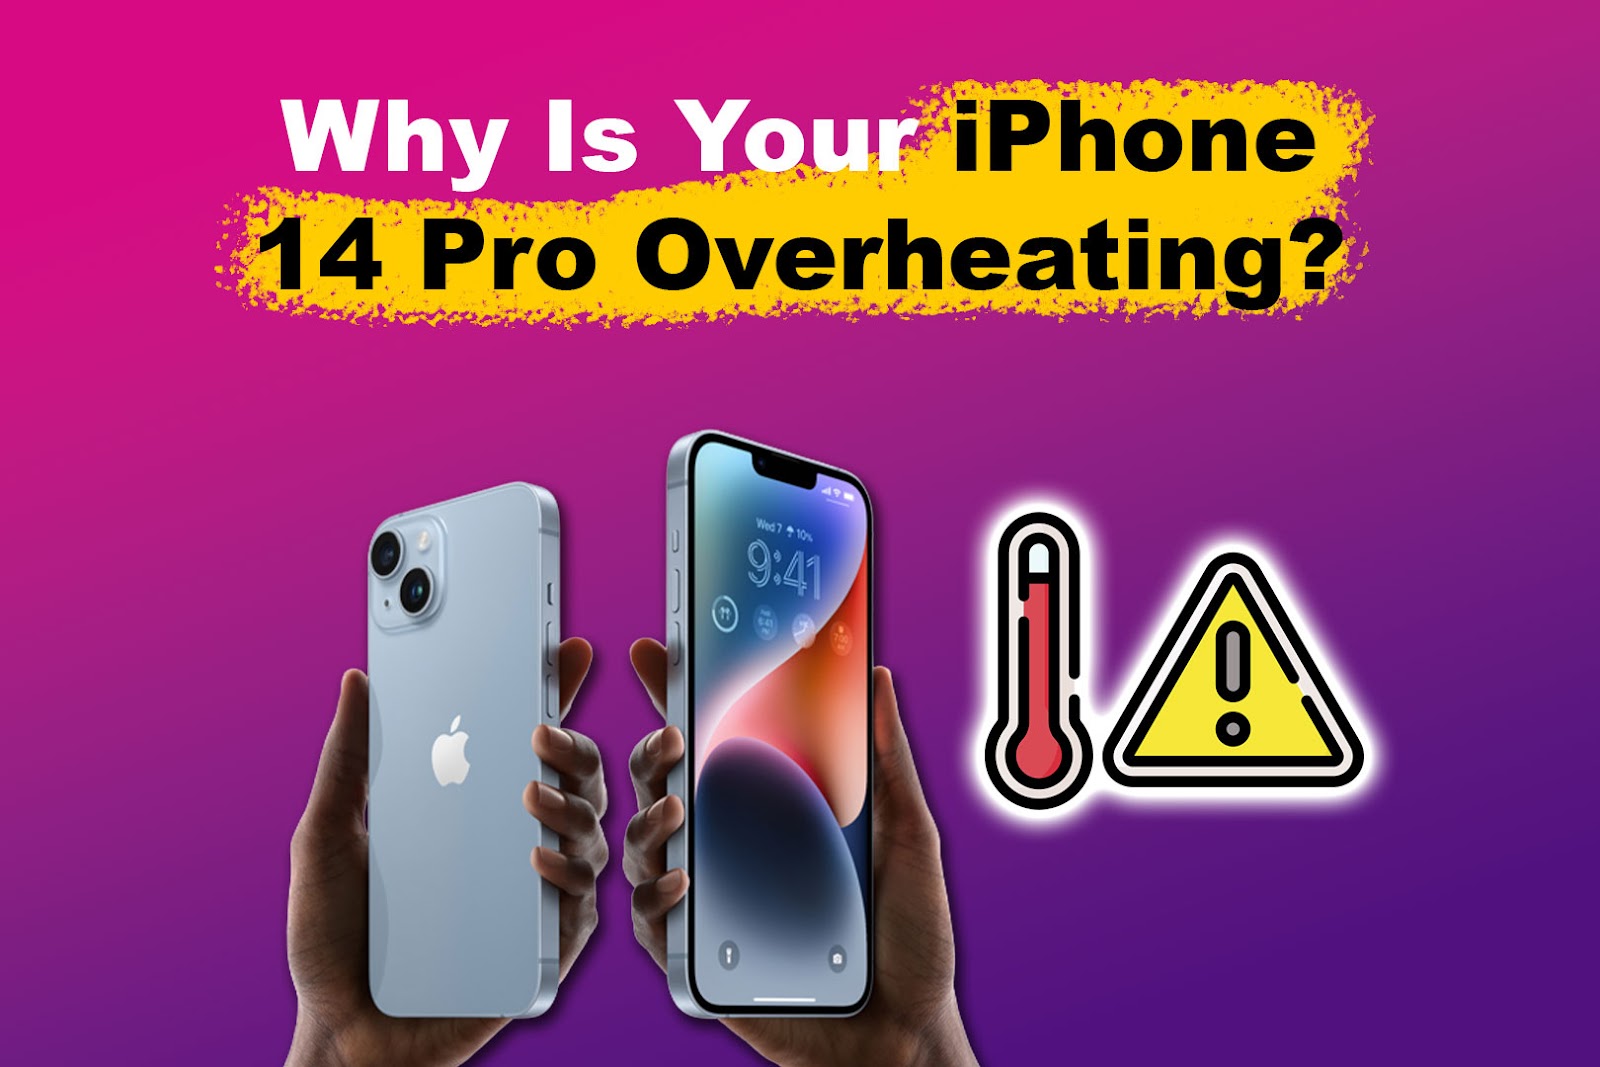 Why Is Your iPhone 14 Pro Overheating